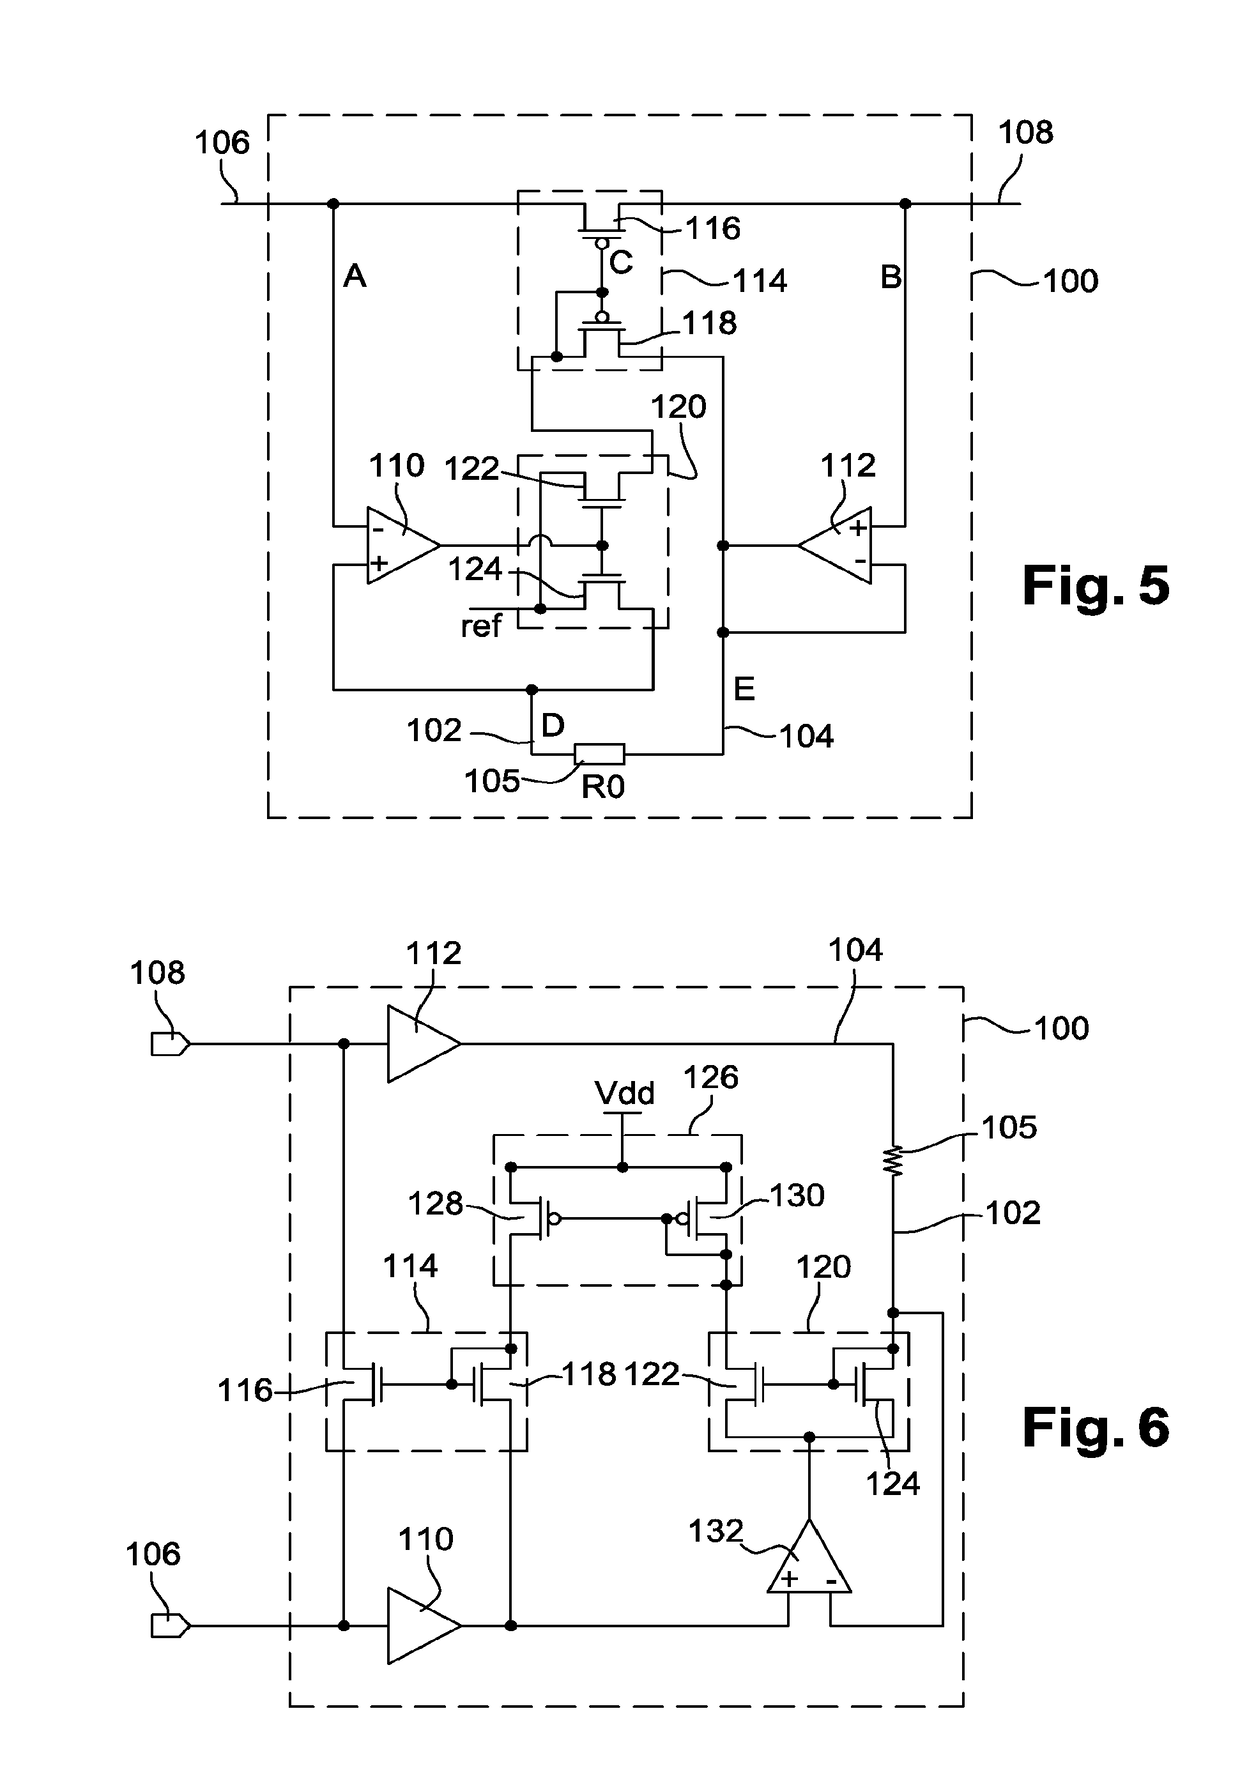 Device modifying the impedance value of a reference resistor